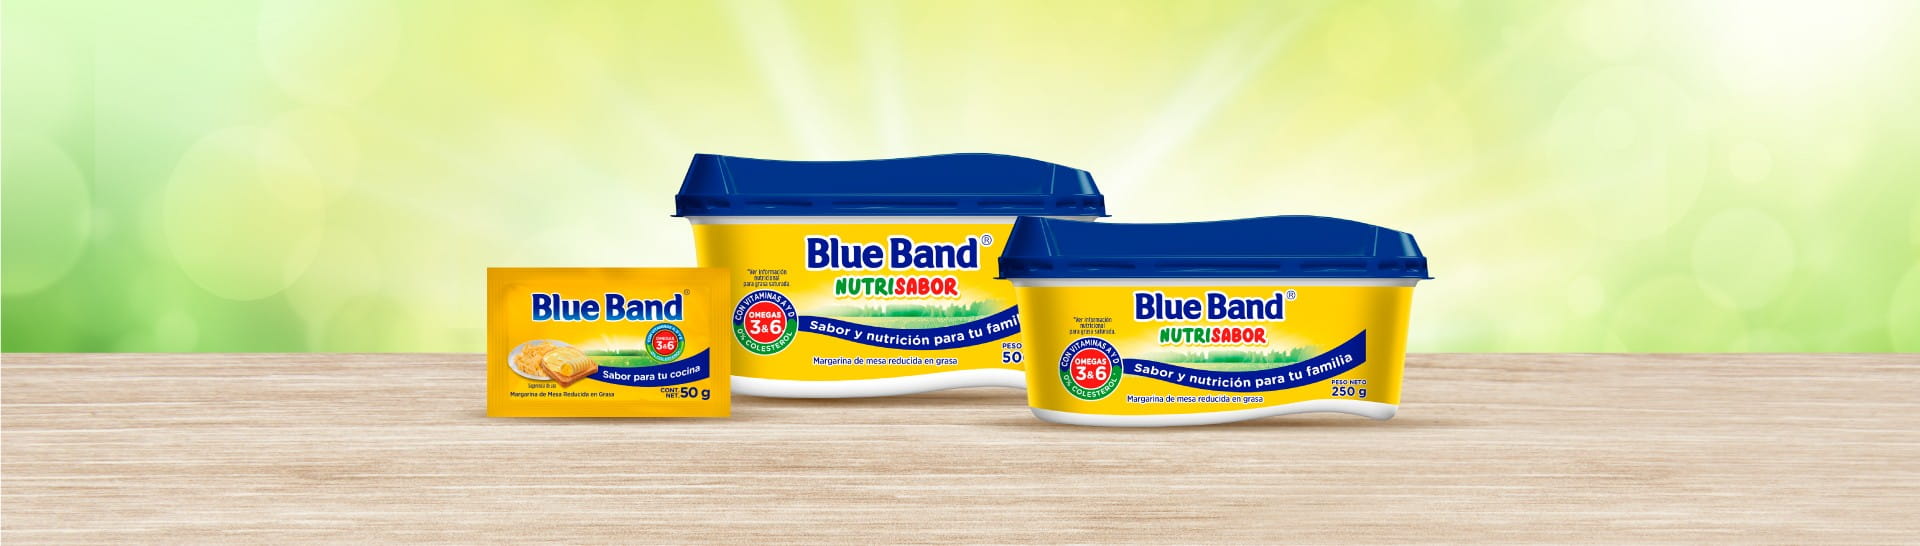 Blue Band Products